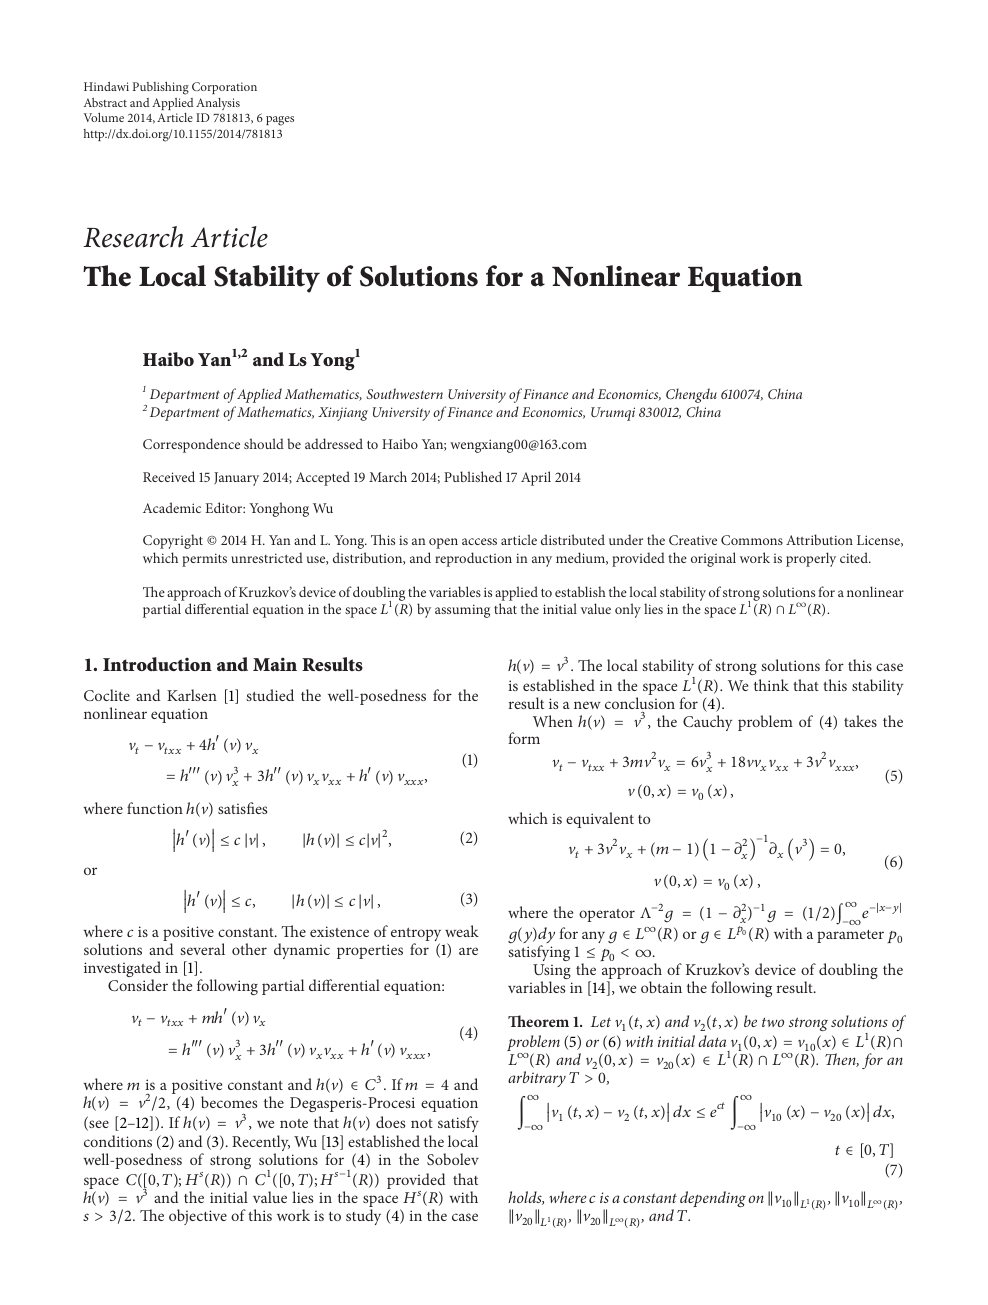 The Local Stability Of Solutions For A Nonlinear Equation Topic Of Research Paper In Mathematics Download Scholarly Article Pdf And Read For Free On Cyberleninka Open Science Hub